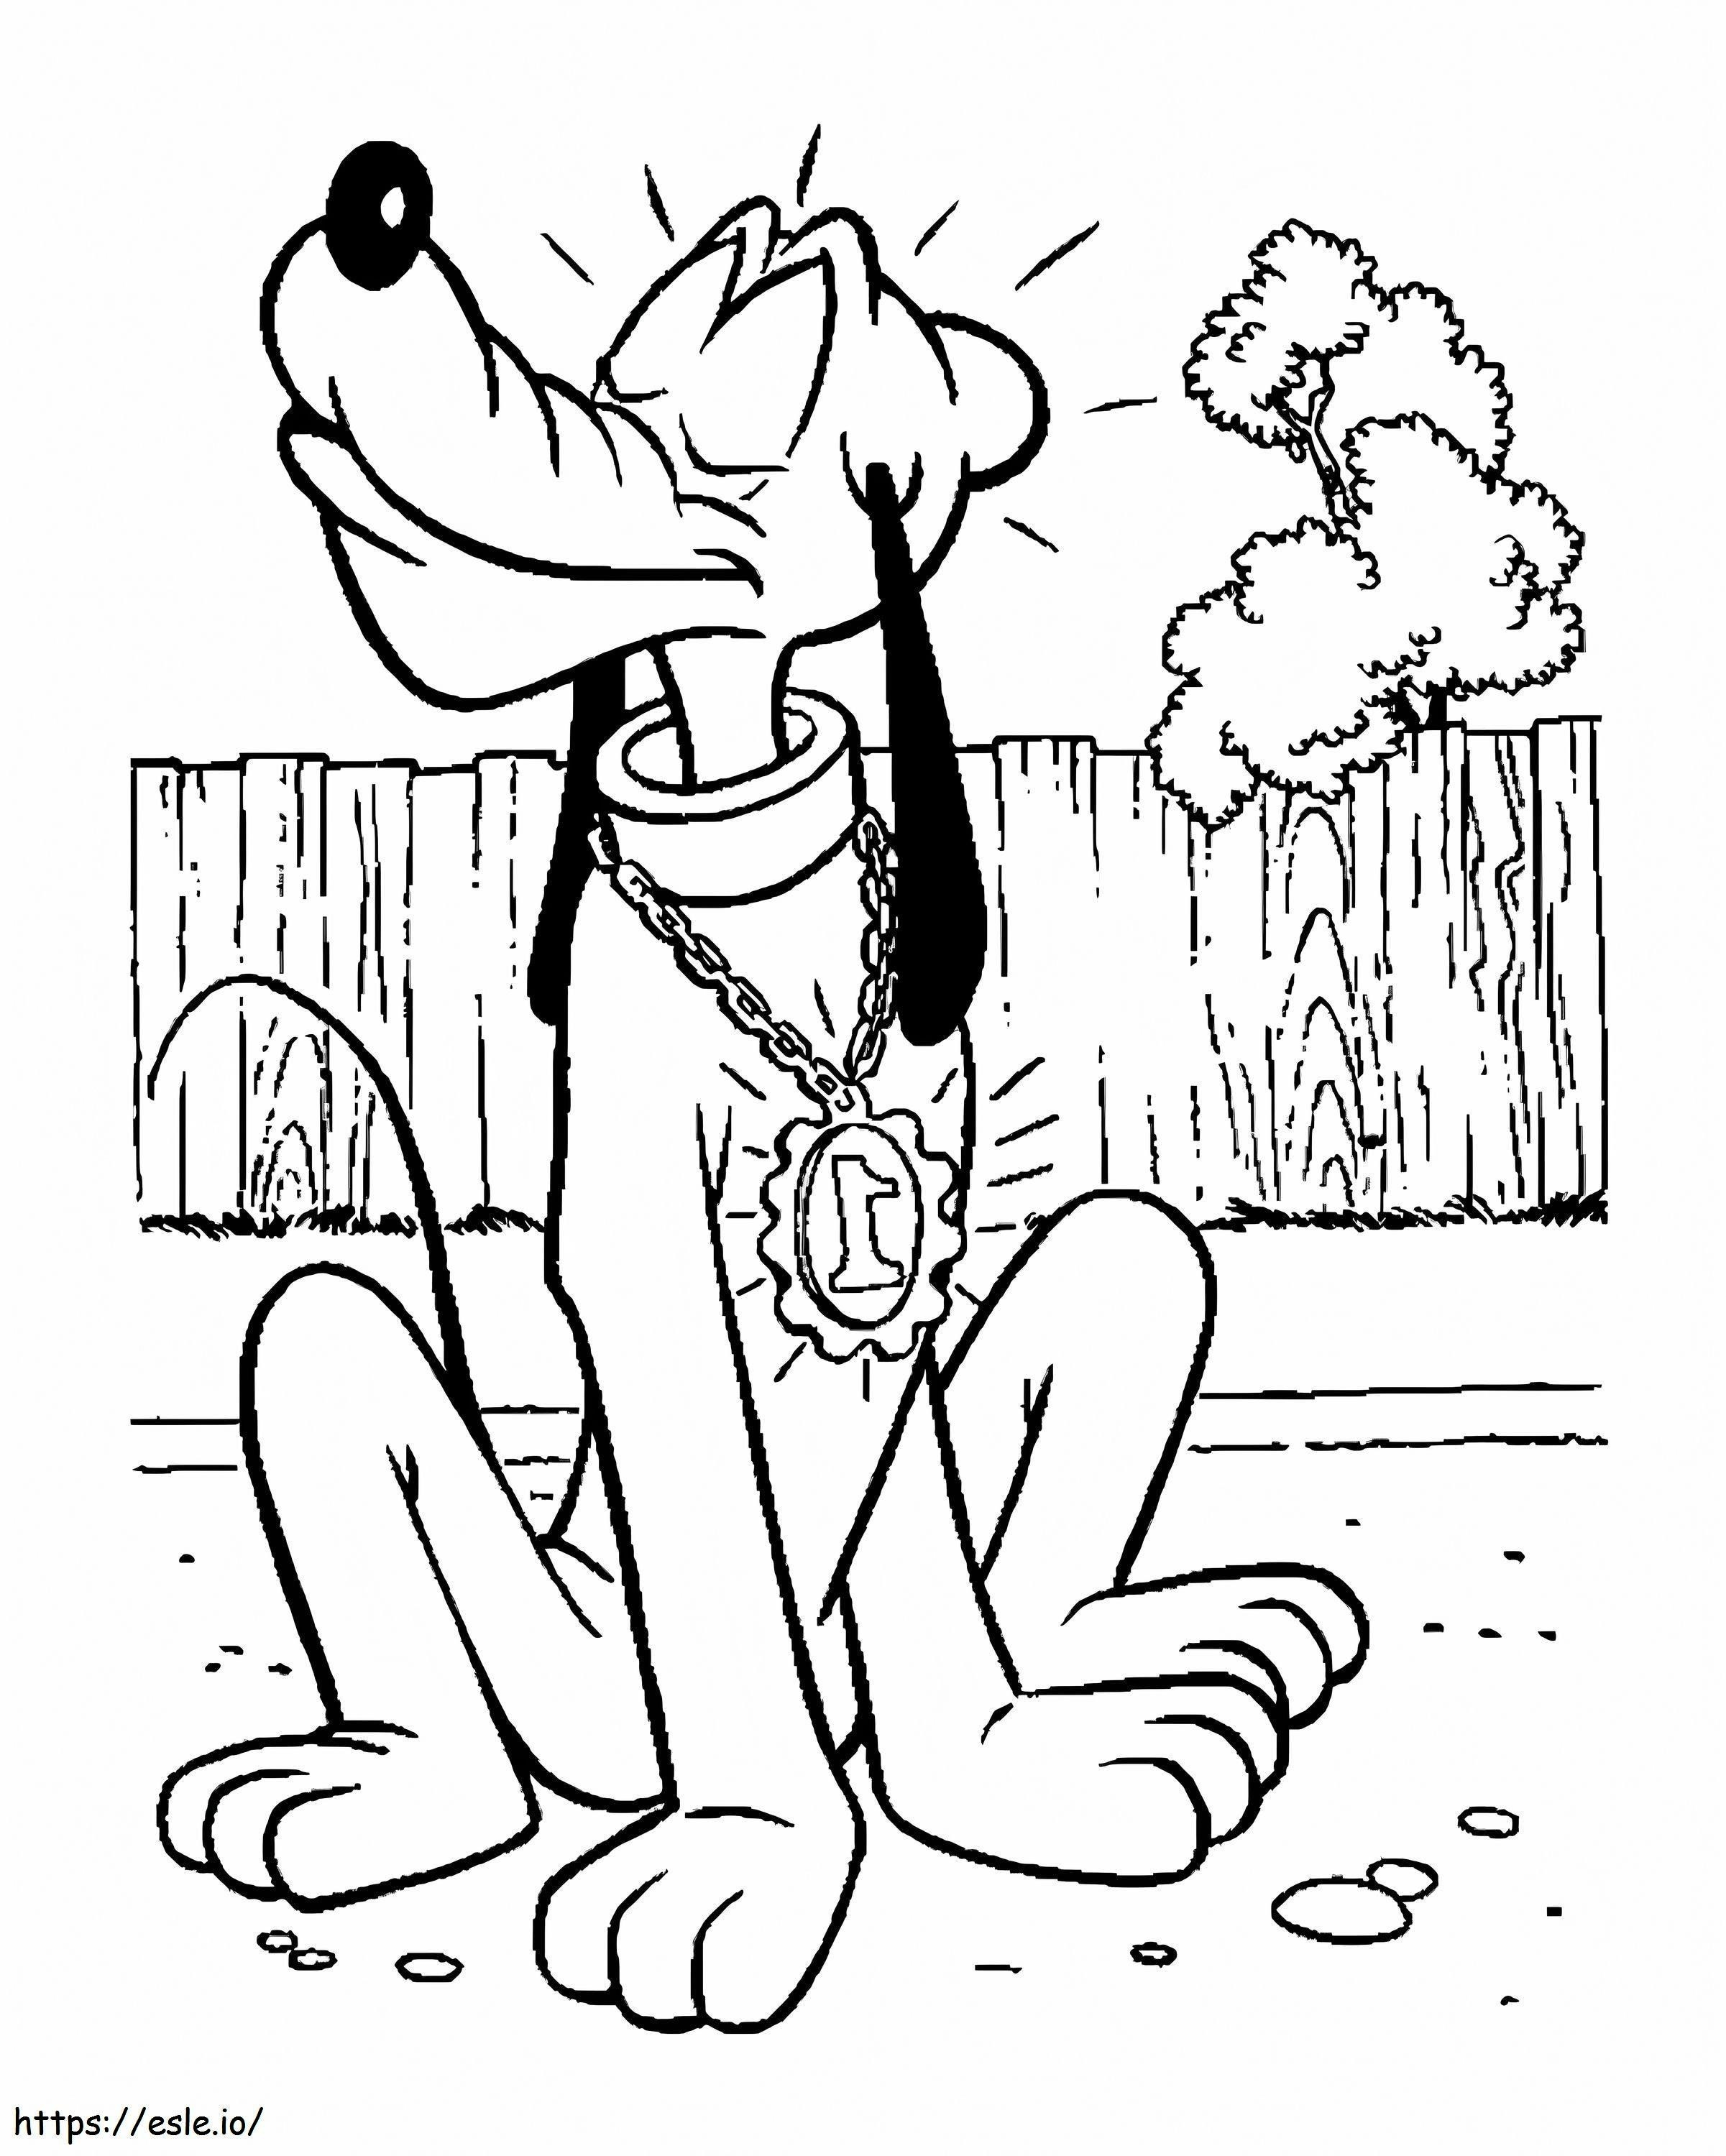 Cool Pluto coloring page